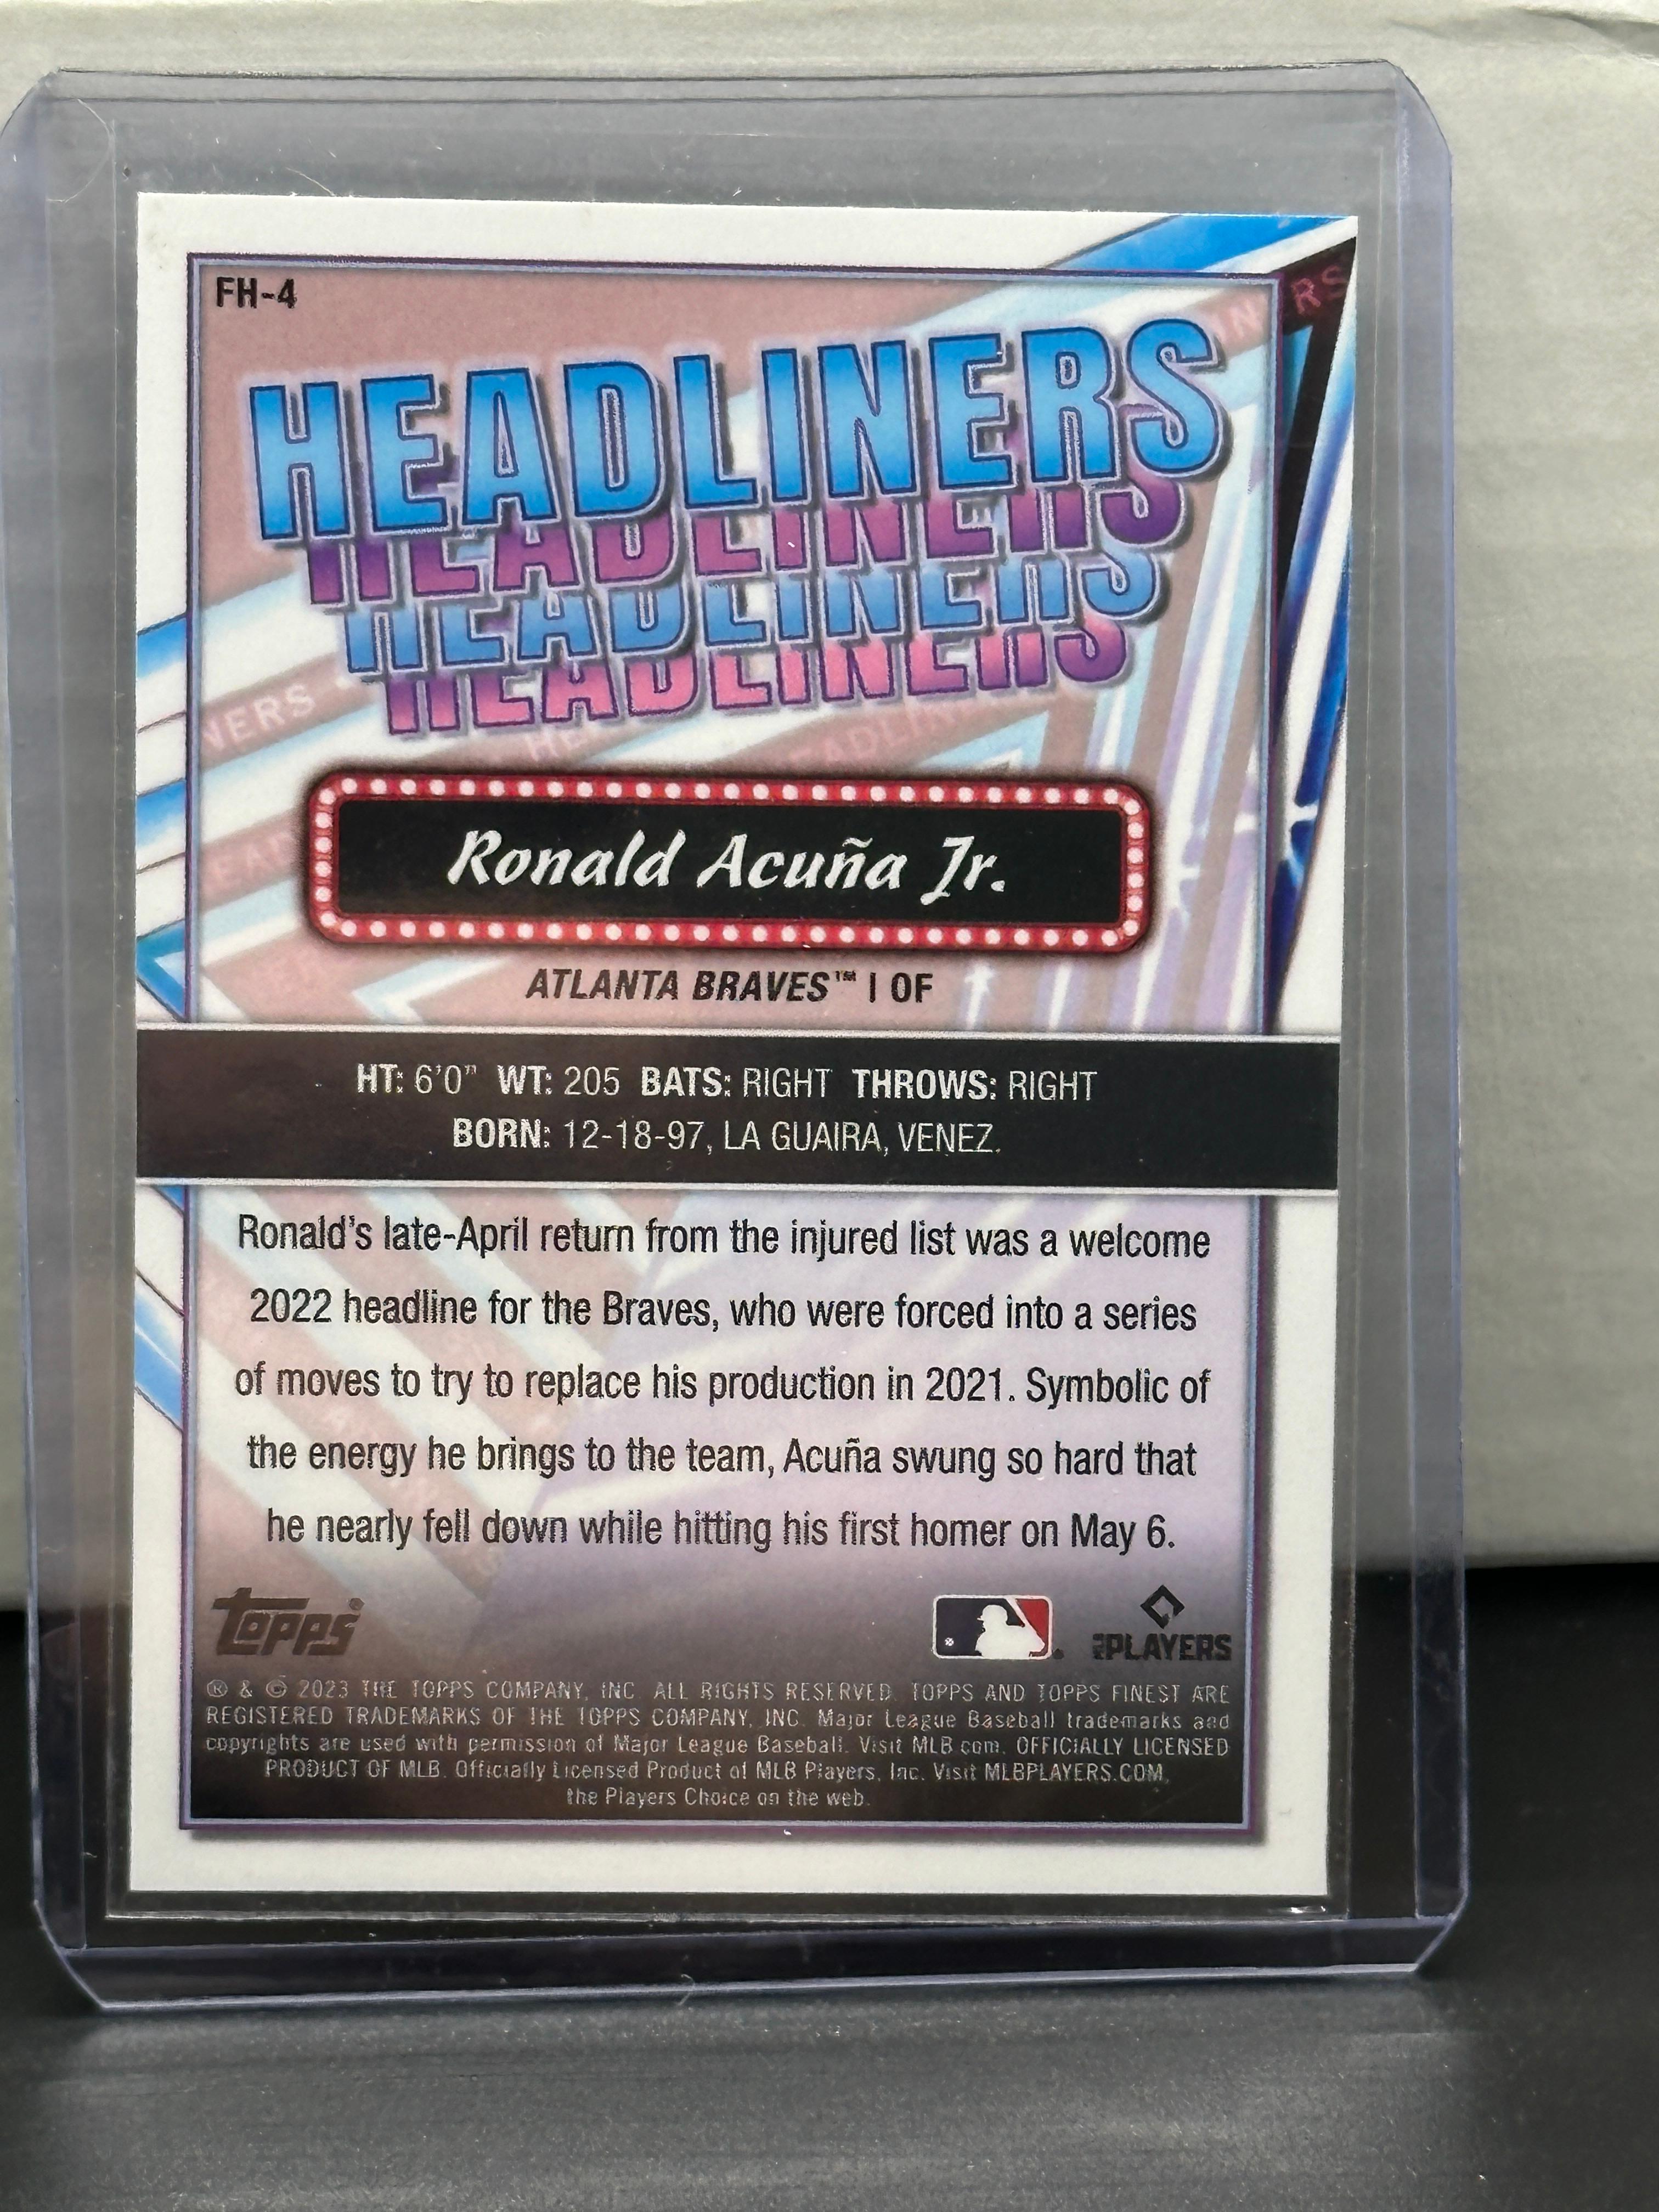 Ronald Acuna Jr. 2023 Topps Finest Headliners Refractor Insert #FH-4